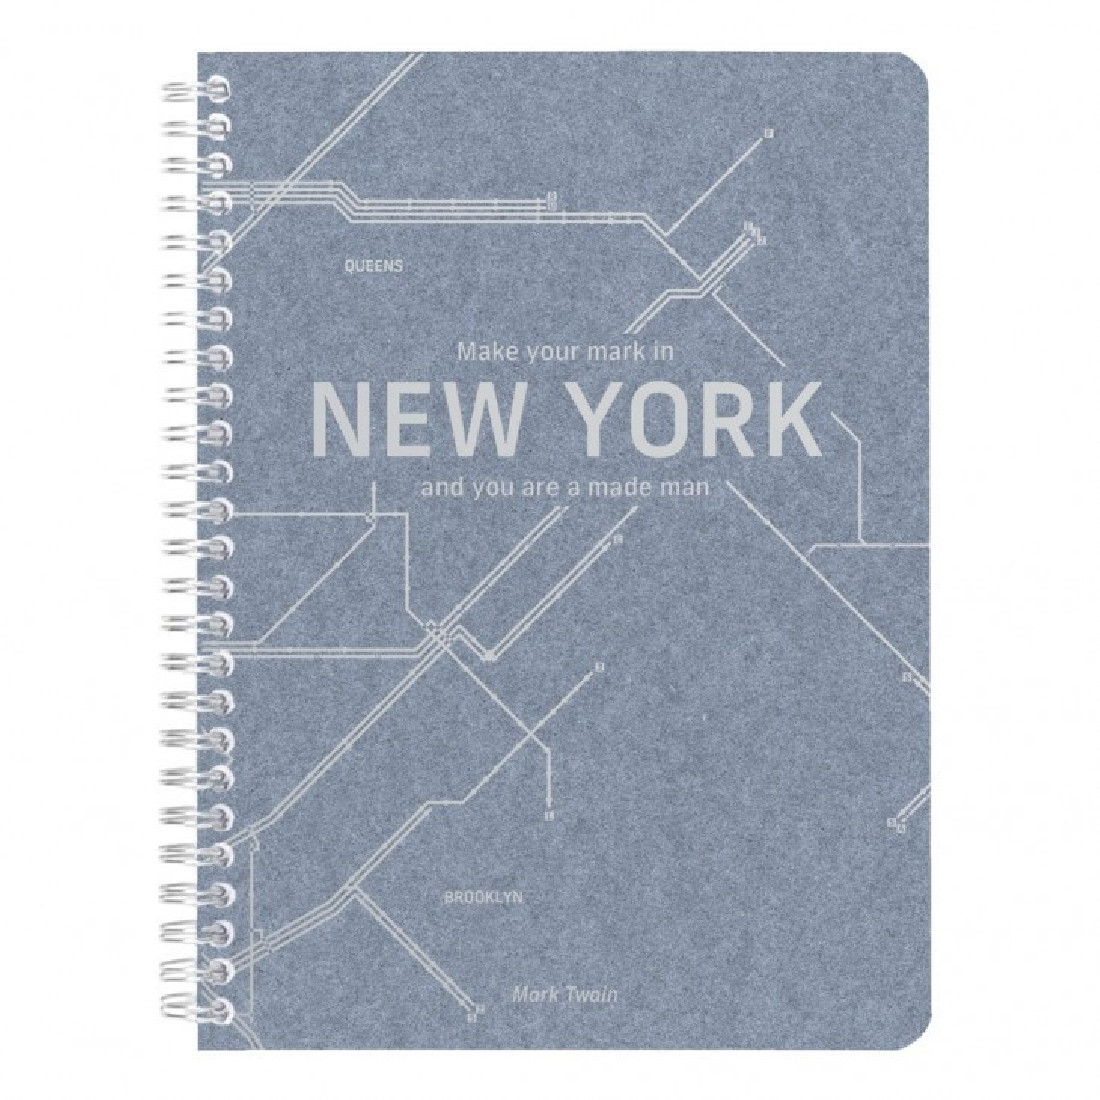 Clairefontaine Rhodia Jeans spiral notebook A5 21x14,8cm, New York metro, 90gr, lined, 148 pages, 083536